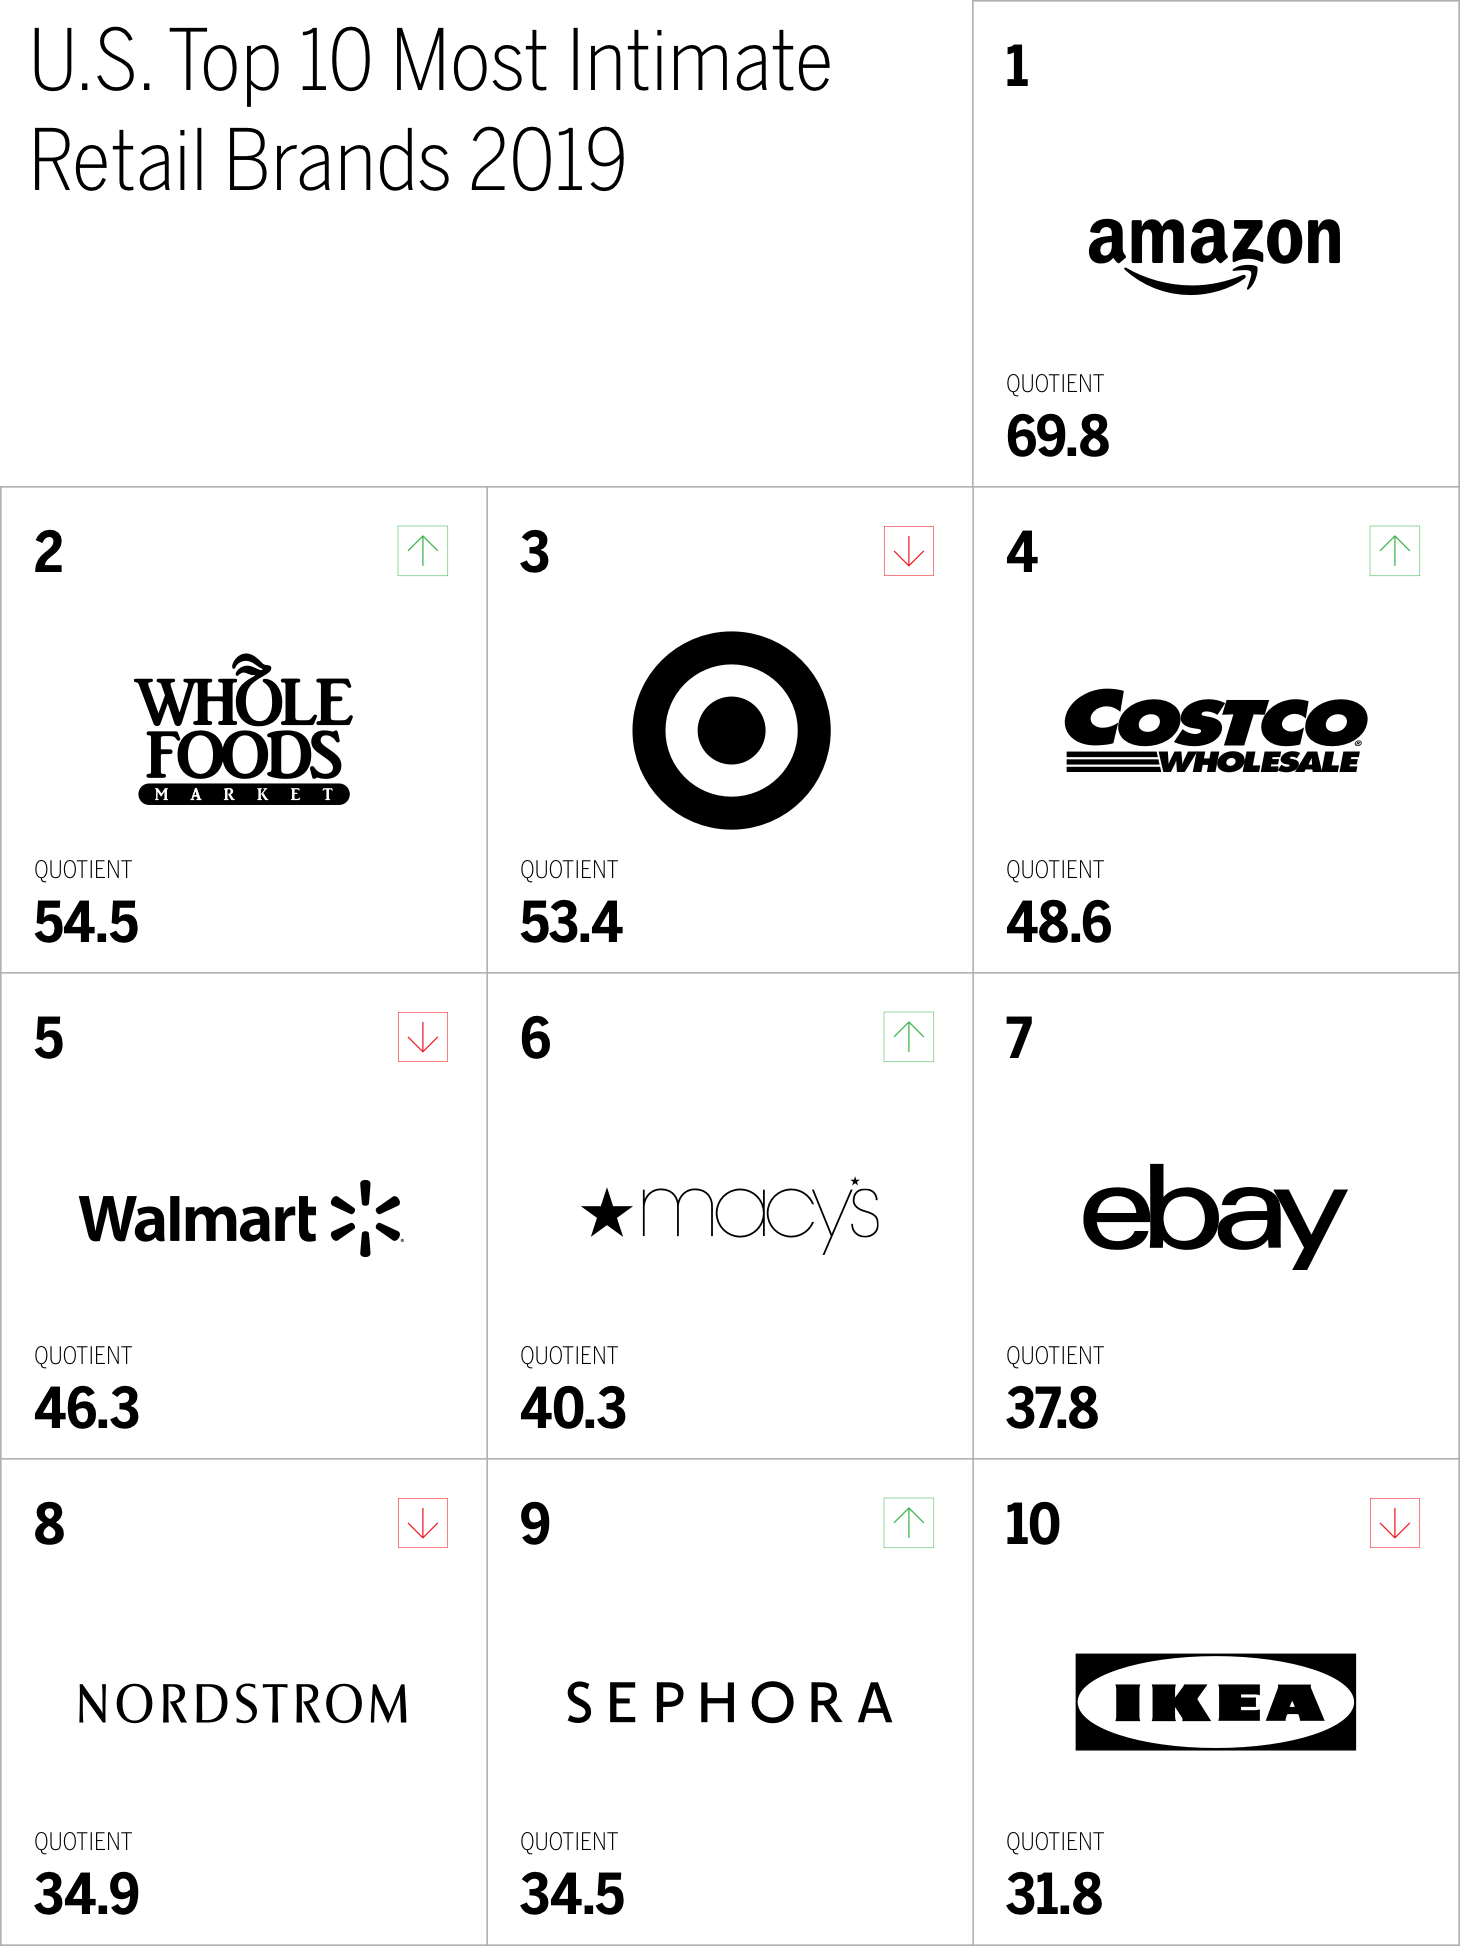 The top U.S. retail brands chart